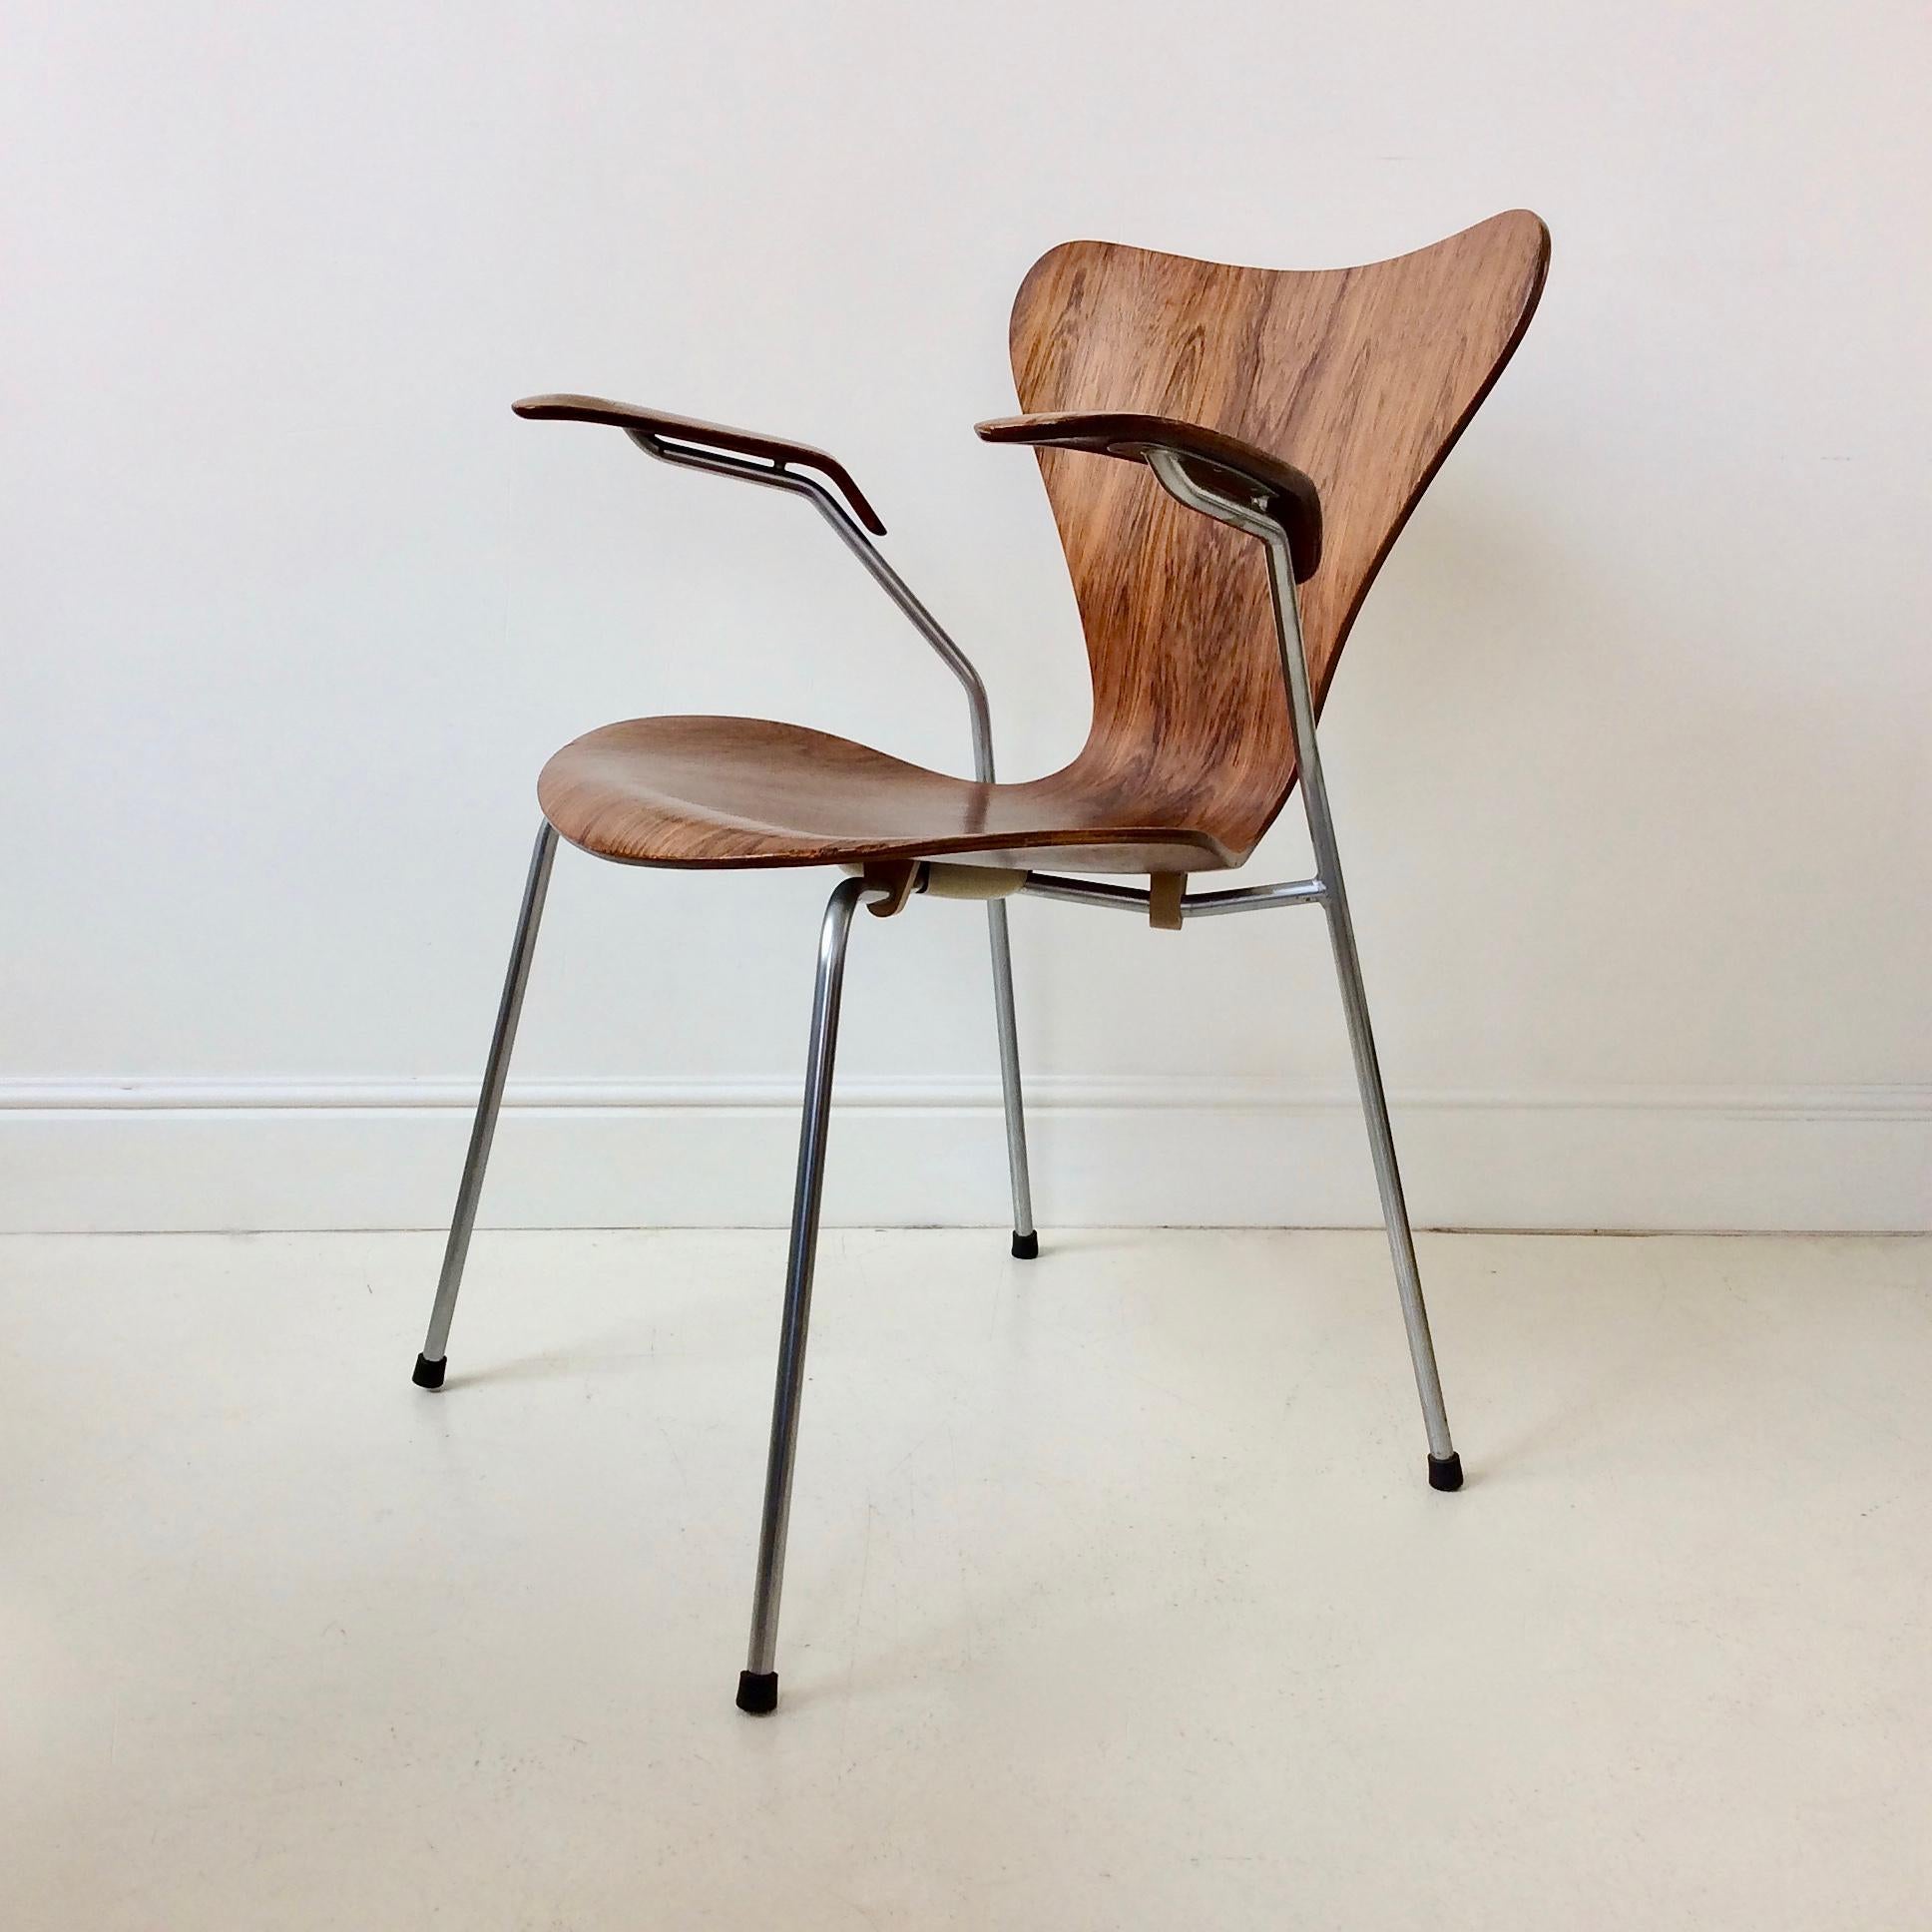 Arne Jacobsen butterfly chair model 3207 with armrest for Fritz Hansen, circa 1955, Denmark.
Rare version in palissander.
Dimensions: 75 cm H, 53 cm D, 62 cm W. Seat height 43 cm.
Good condition.
We ship worldwide
All purchases are covered by our